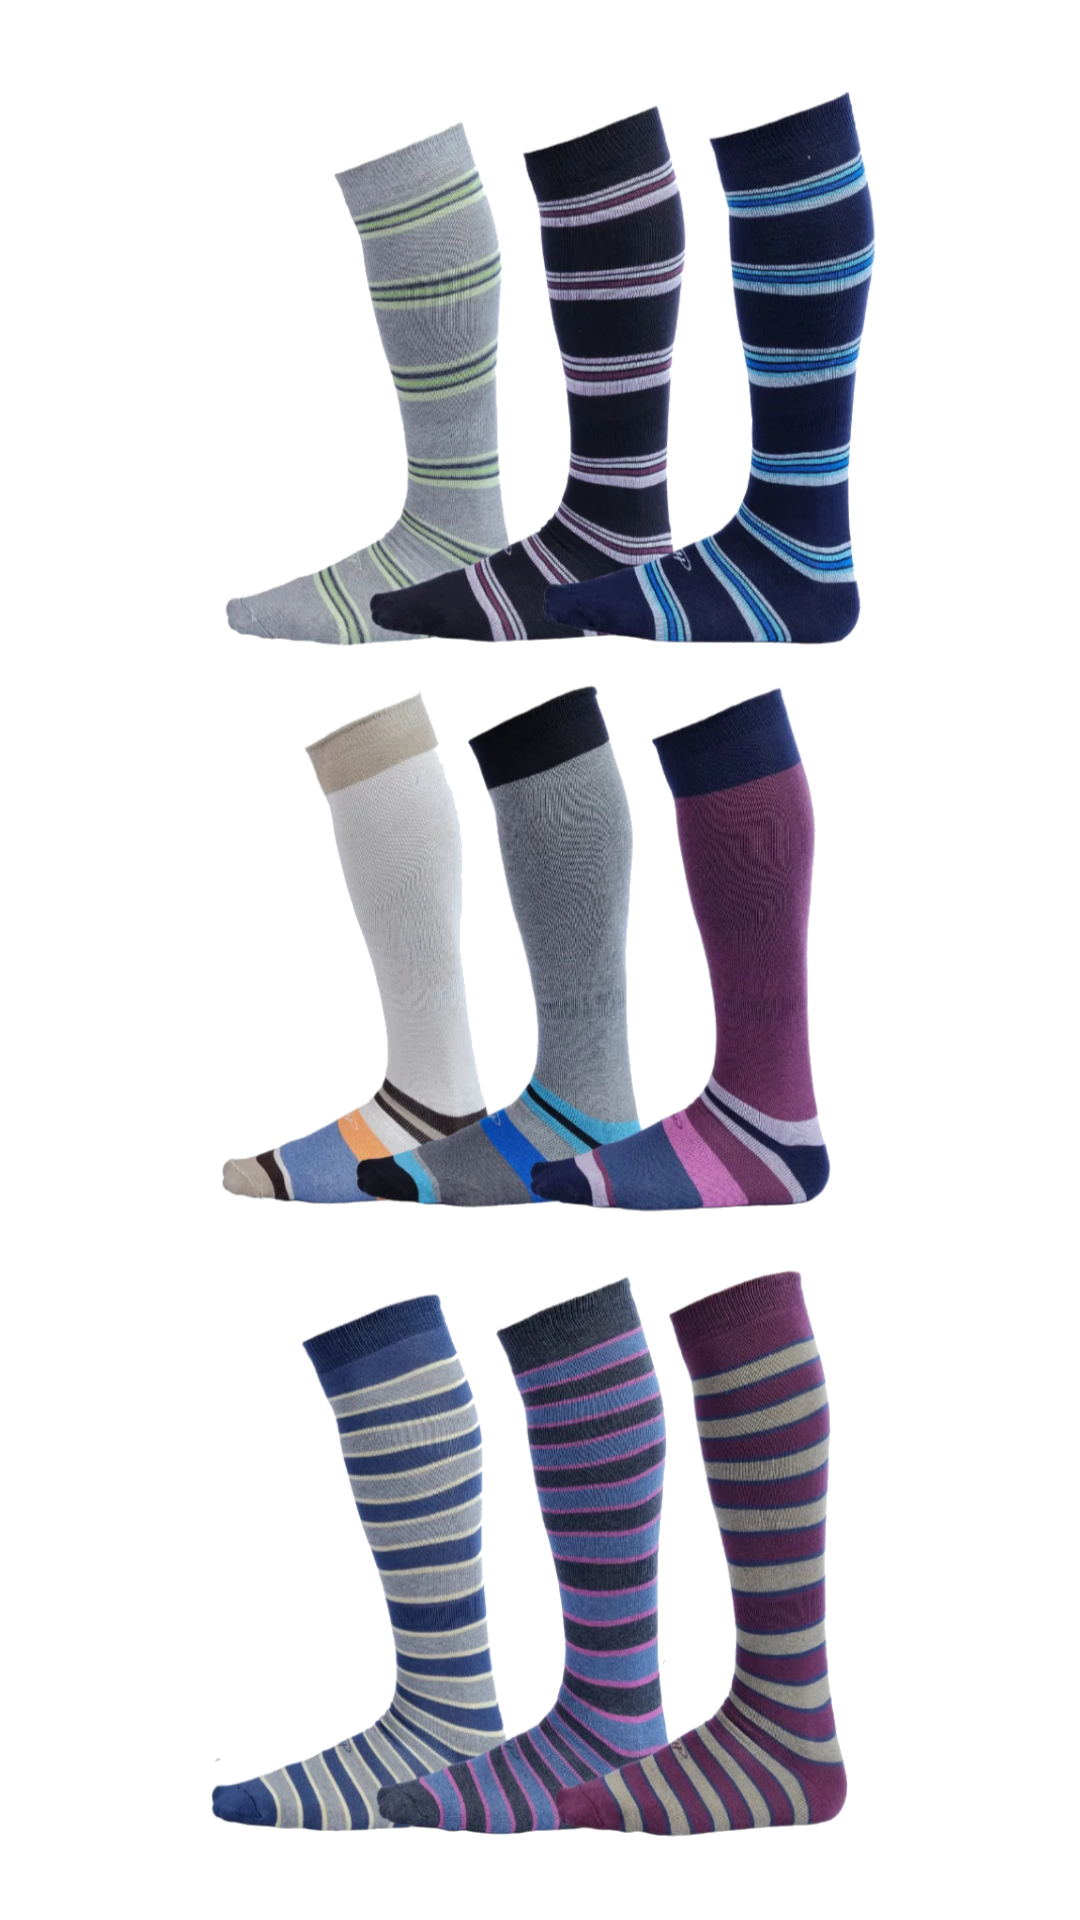 Blue, Burgundy, and Green Stripes on Cotton Over the Calf Dress Socks